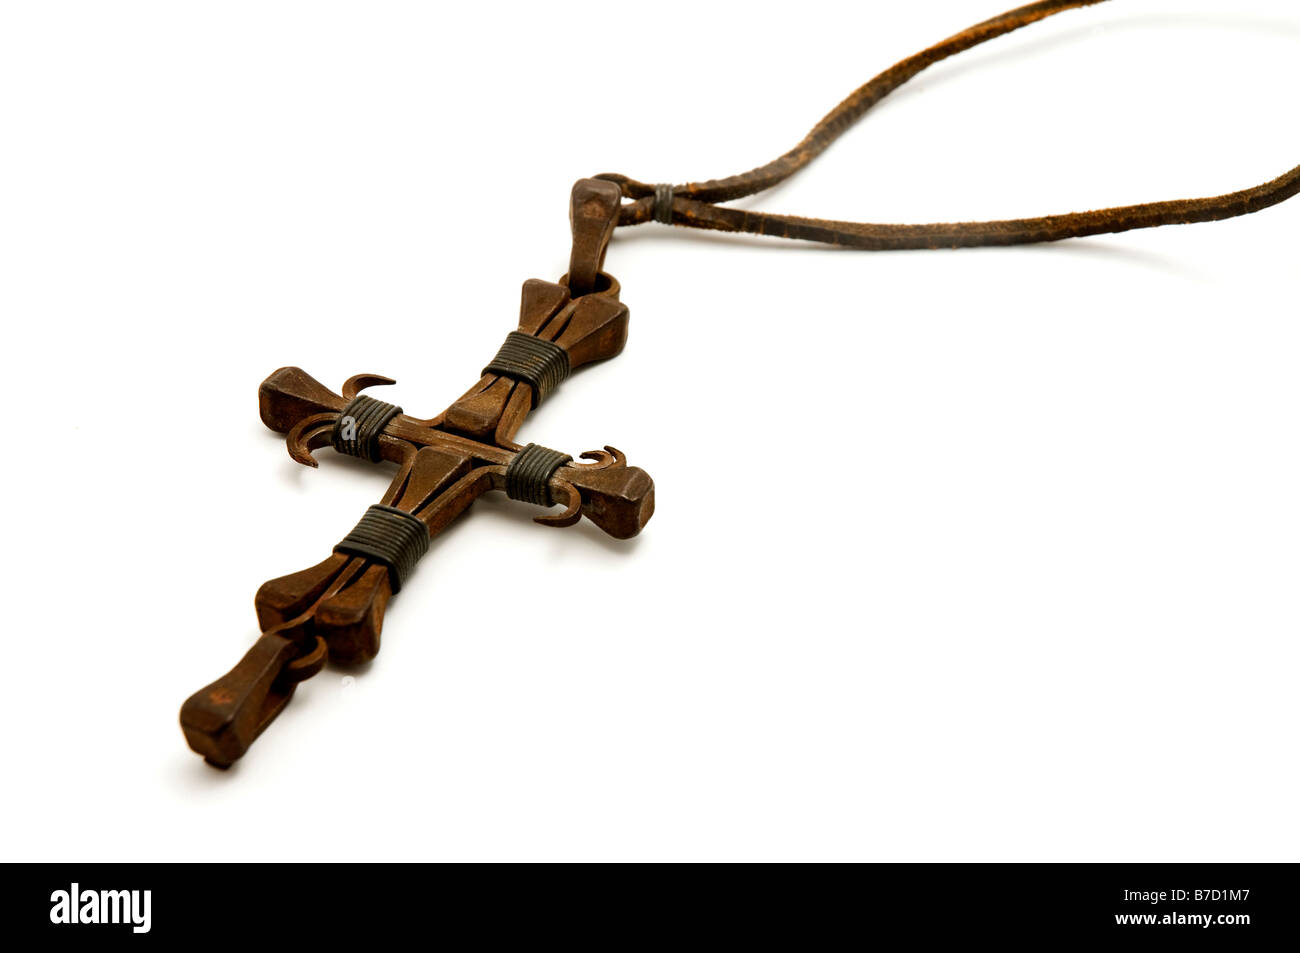 Old iron cross made from nails on a white background Stock Photo